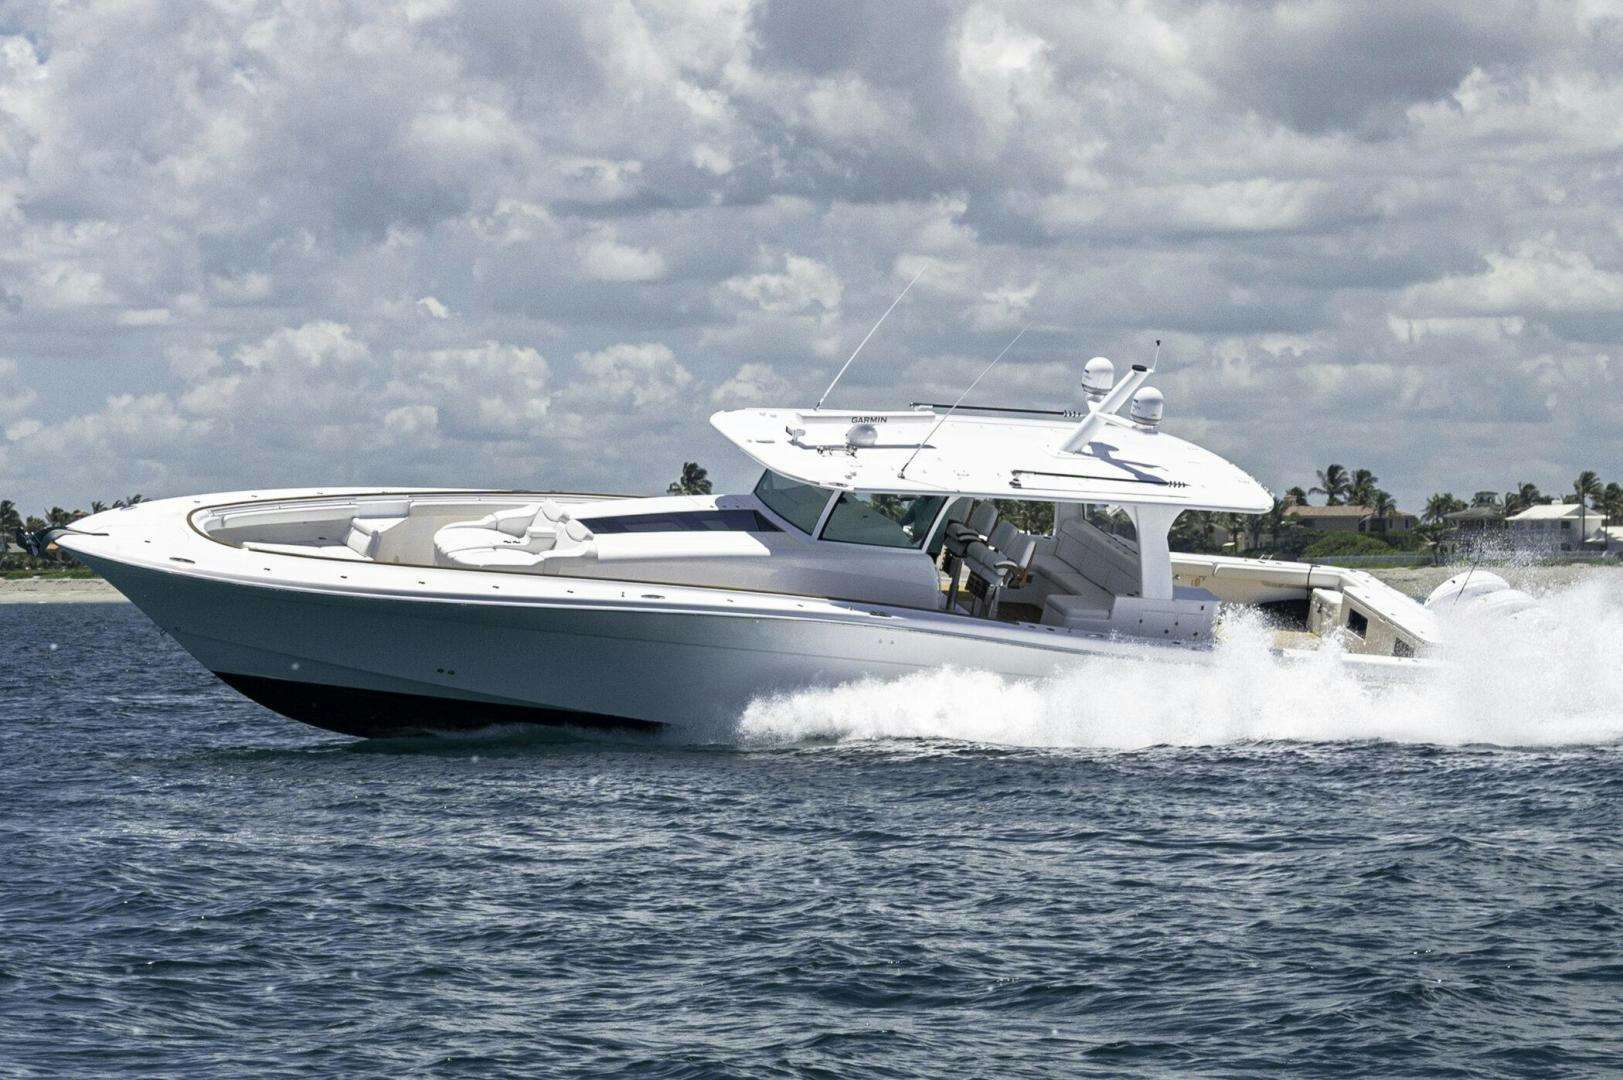 SEA BUDDY Yacht for Sale in Fort Lauderdale